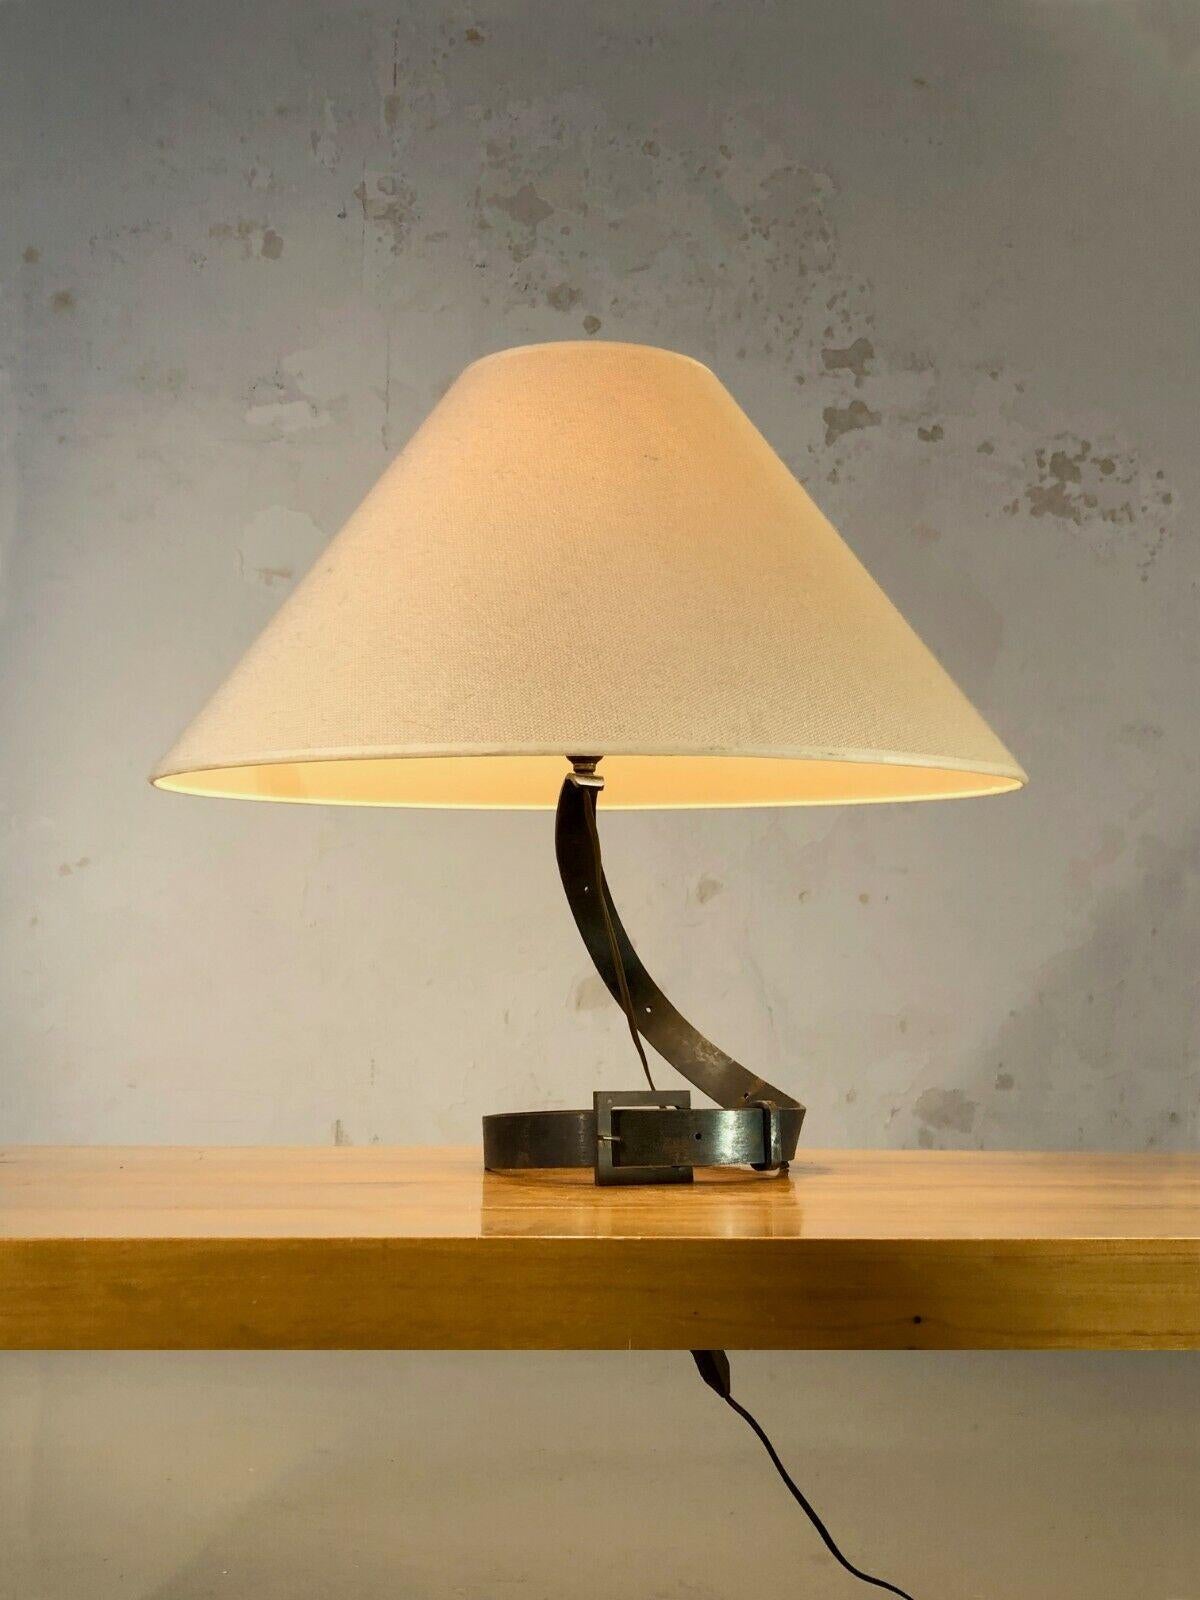 An astonishing and elegant table lamp in metal belt, Modernist, Shabby-Chic, Popular Art, in folded wrought iron decorated with a belt buckle, the whole supporting a socket, to be attributed, France 1960.

SOLD WITHOUT LAMPSHADE OR LAMPSHADE IN